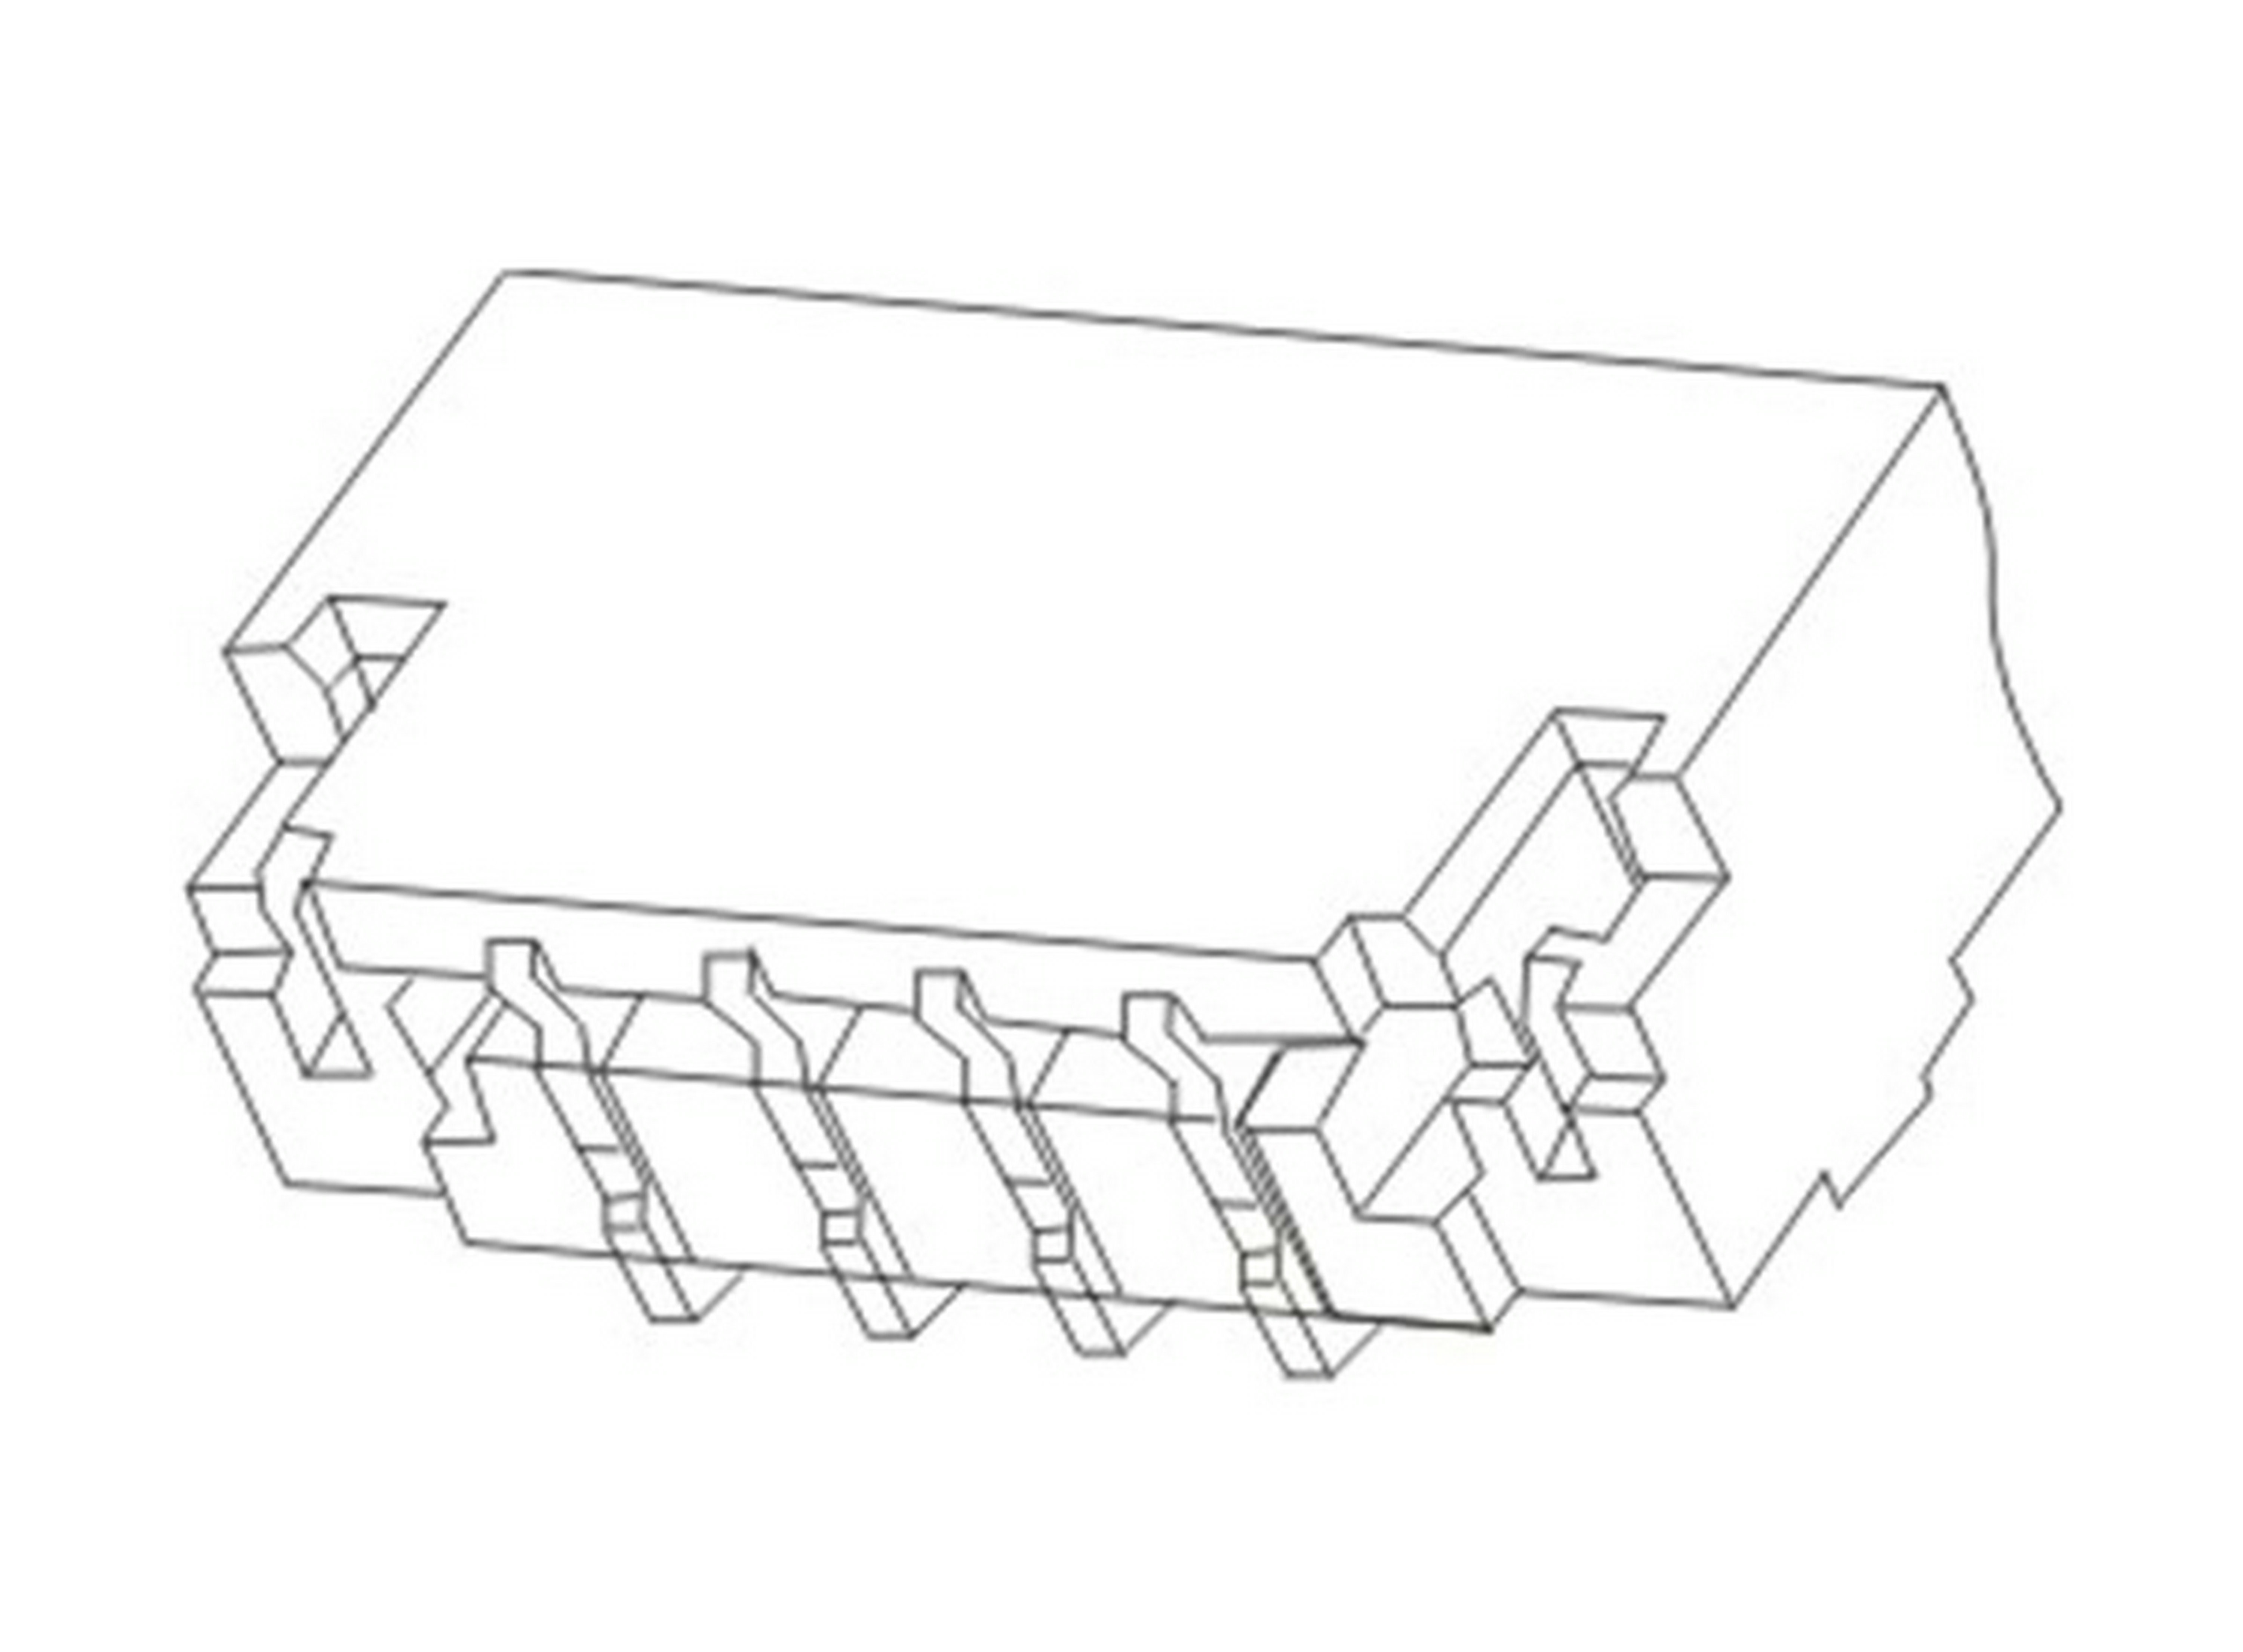 PH0.8mm Wafer, Single Row, Horizontal SMT Type Wafer Connectors   